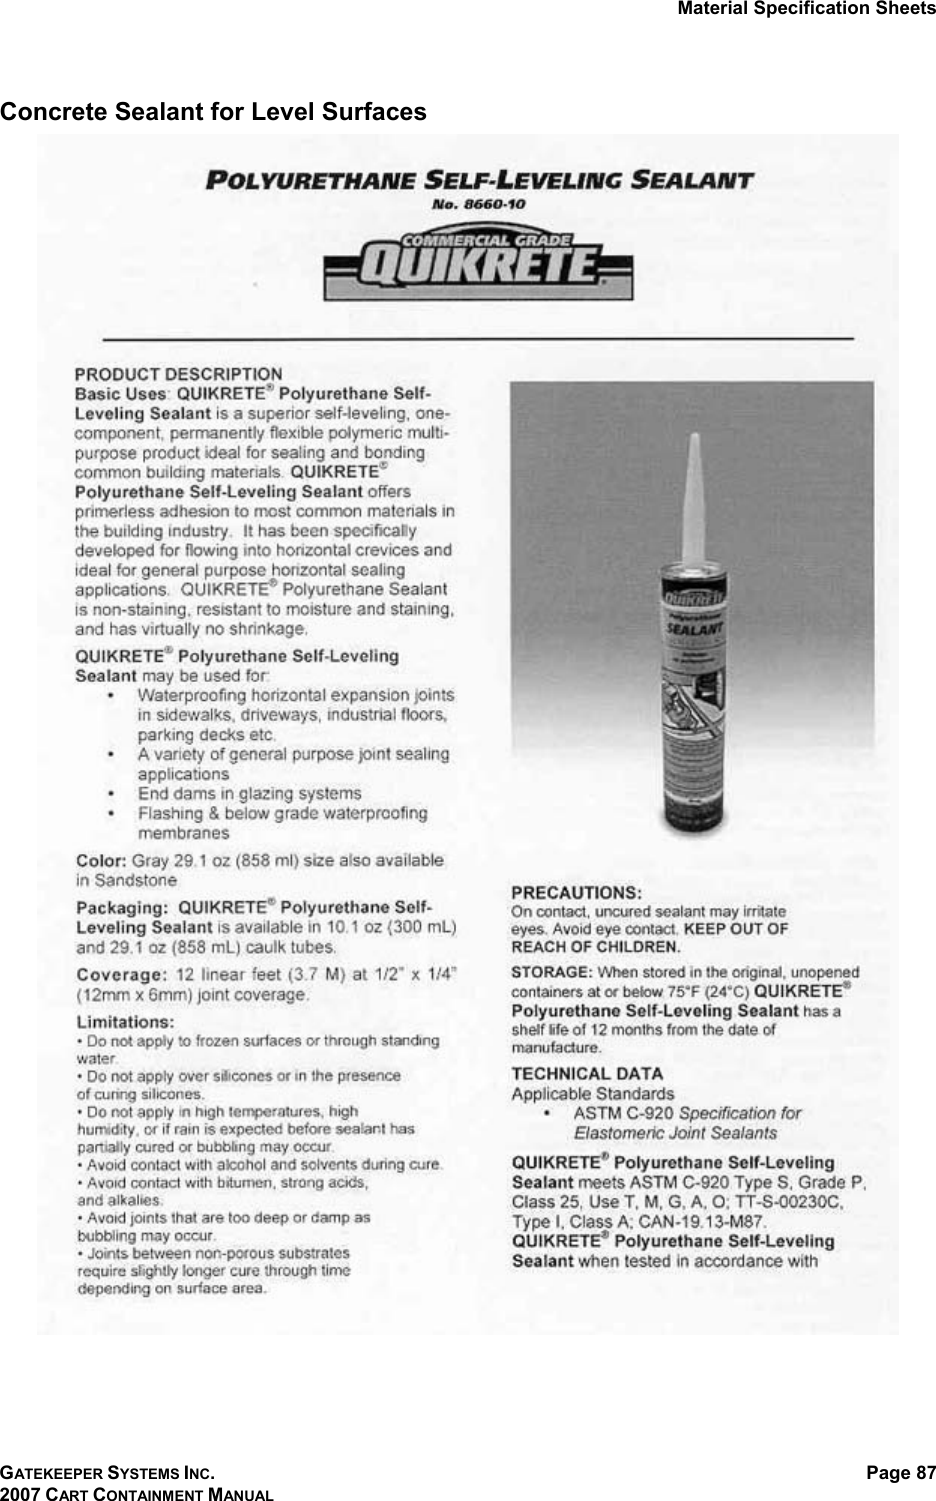 Material Specification Sheets GATEKEEPER SYSTEMS INC. 2007 CART CONTAINMENT MANUAL Page 87  Concrete Sealant for Level Surfaces   